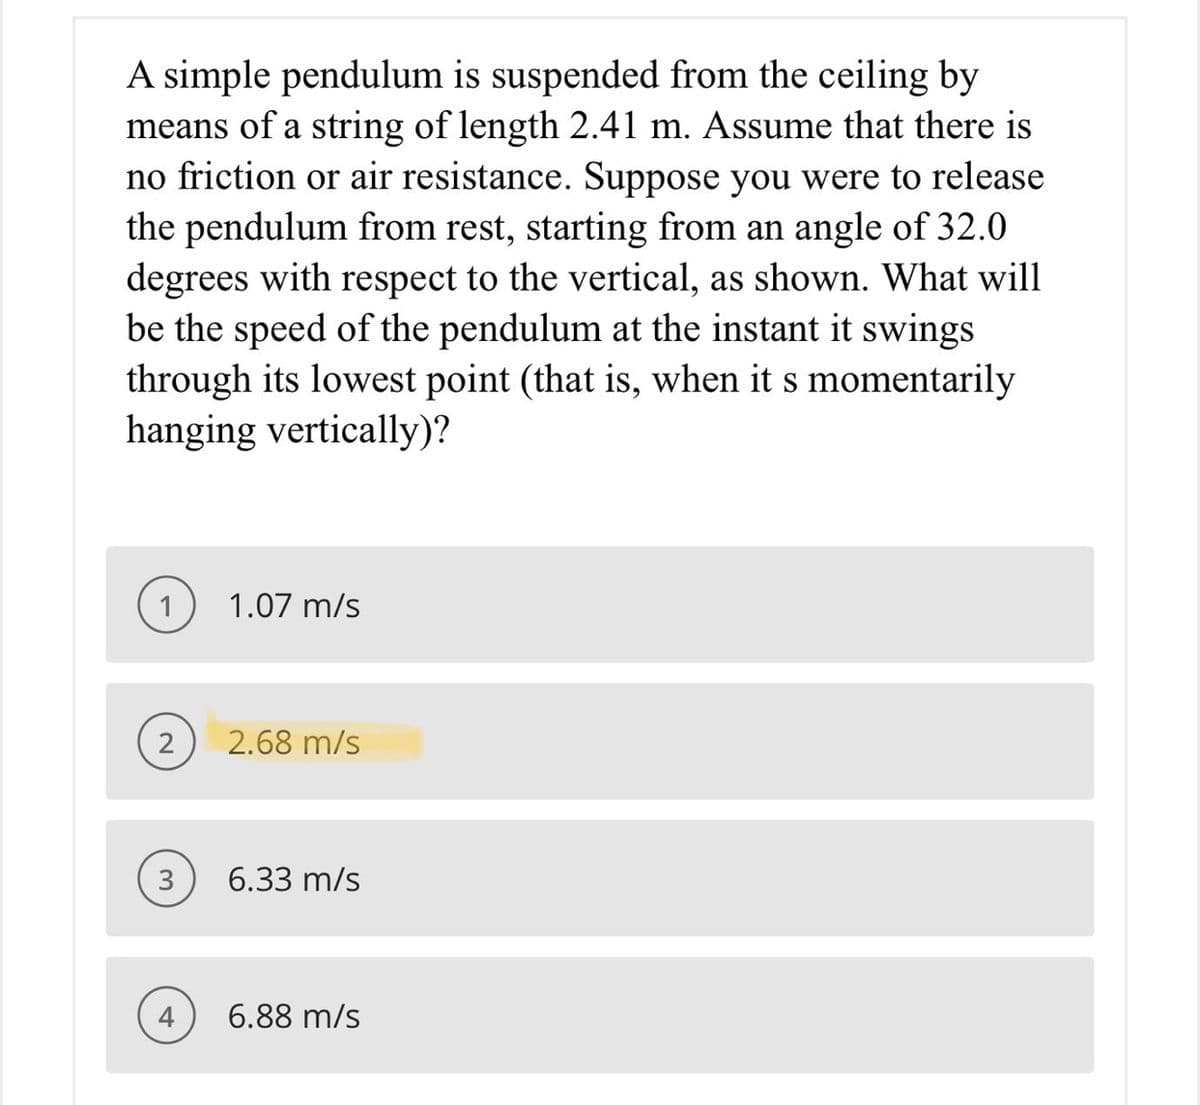 A simple pendulum is suspended from the ceiling by
means of a string of length 2.41 m. Assume that there is
no friction or air resistance. Suppose you were to release
the pendulum from rest, starting from an angle of 32.0
degrees with respect to the vertical, as shown. What will
be the speed of the pendulum at the instant it swings
through its lowest point (that is, when it s momentarily
hanging vertically)?
1.07 m/s
2
2.68 m/s
3
6.33 m/s
6.88 m/s
